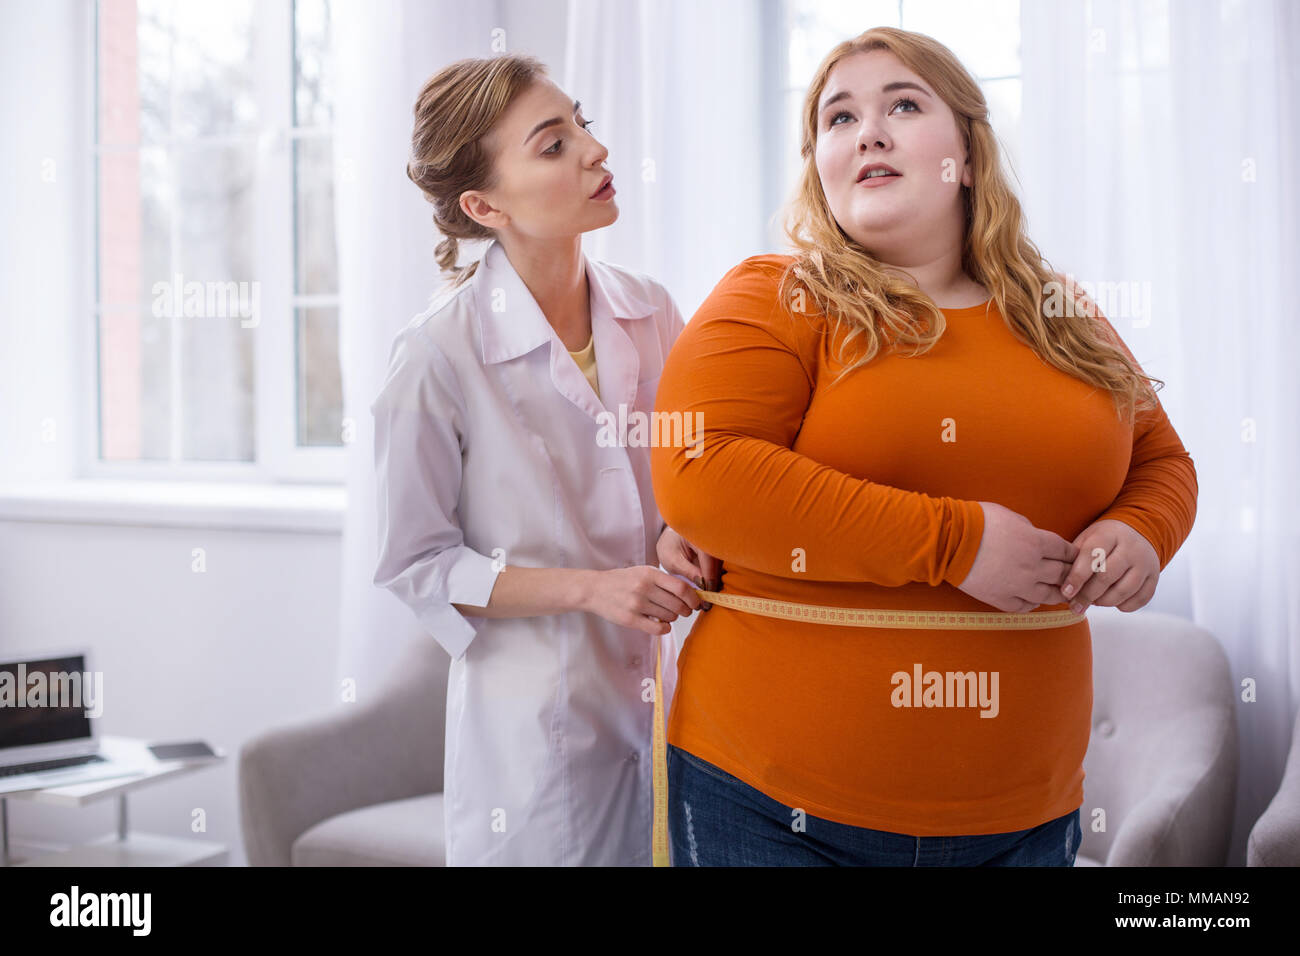 Concentrated doctor talking with a plump woman Stock Photo